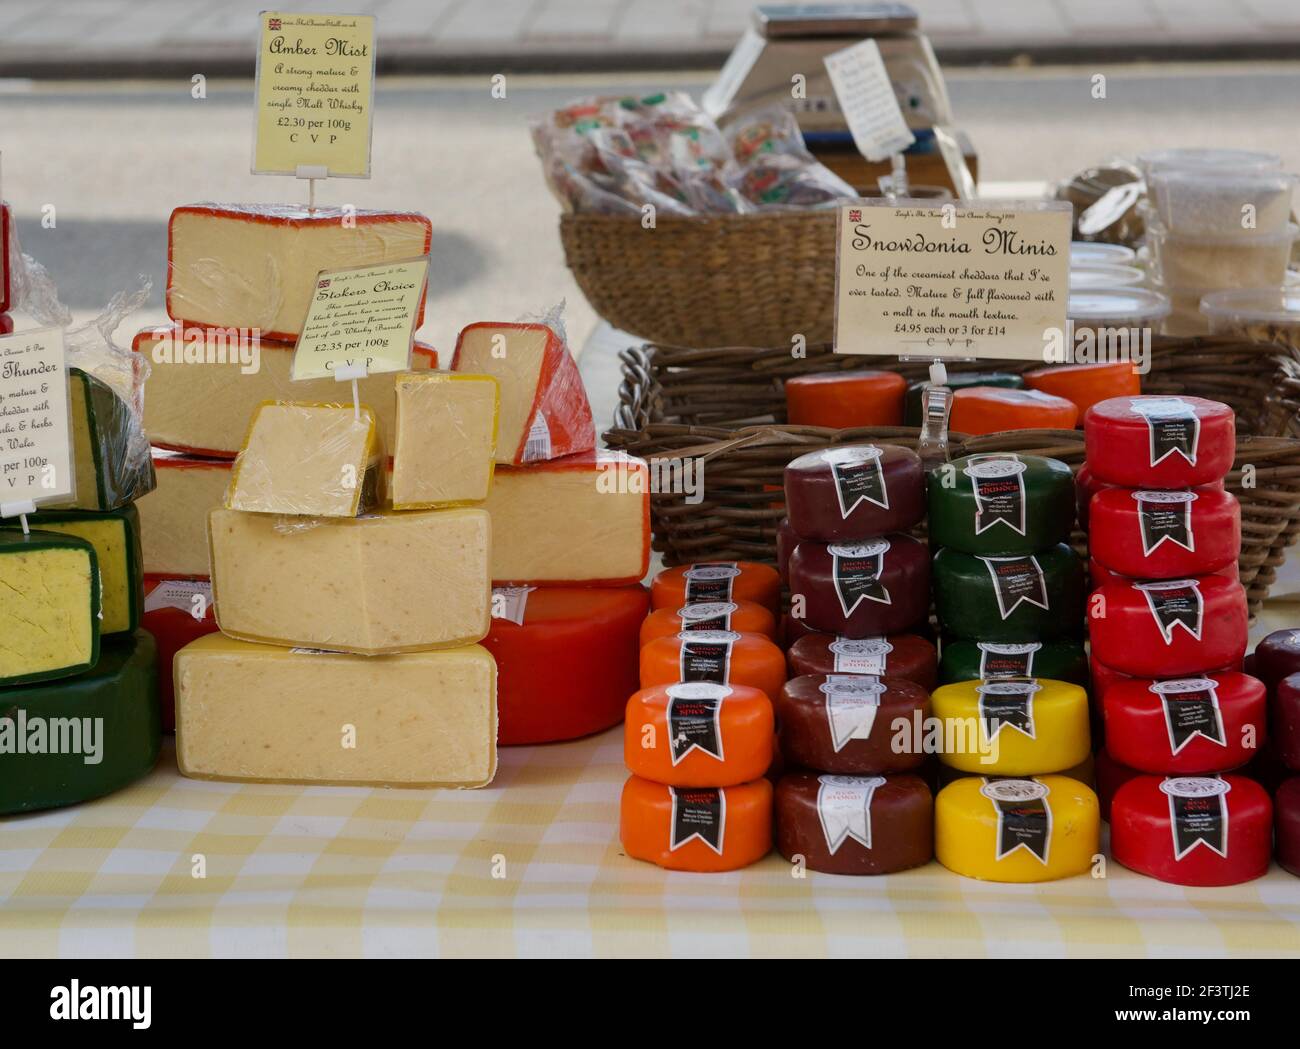 Cheese for sale at Farmers Market Stock Photo